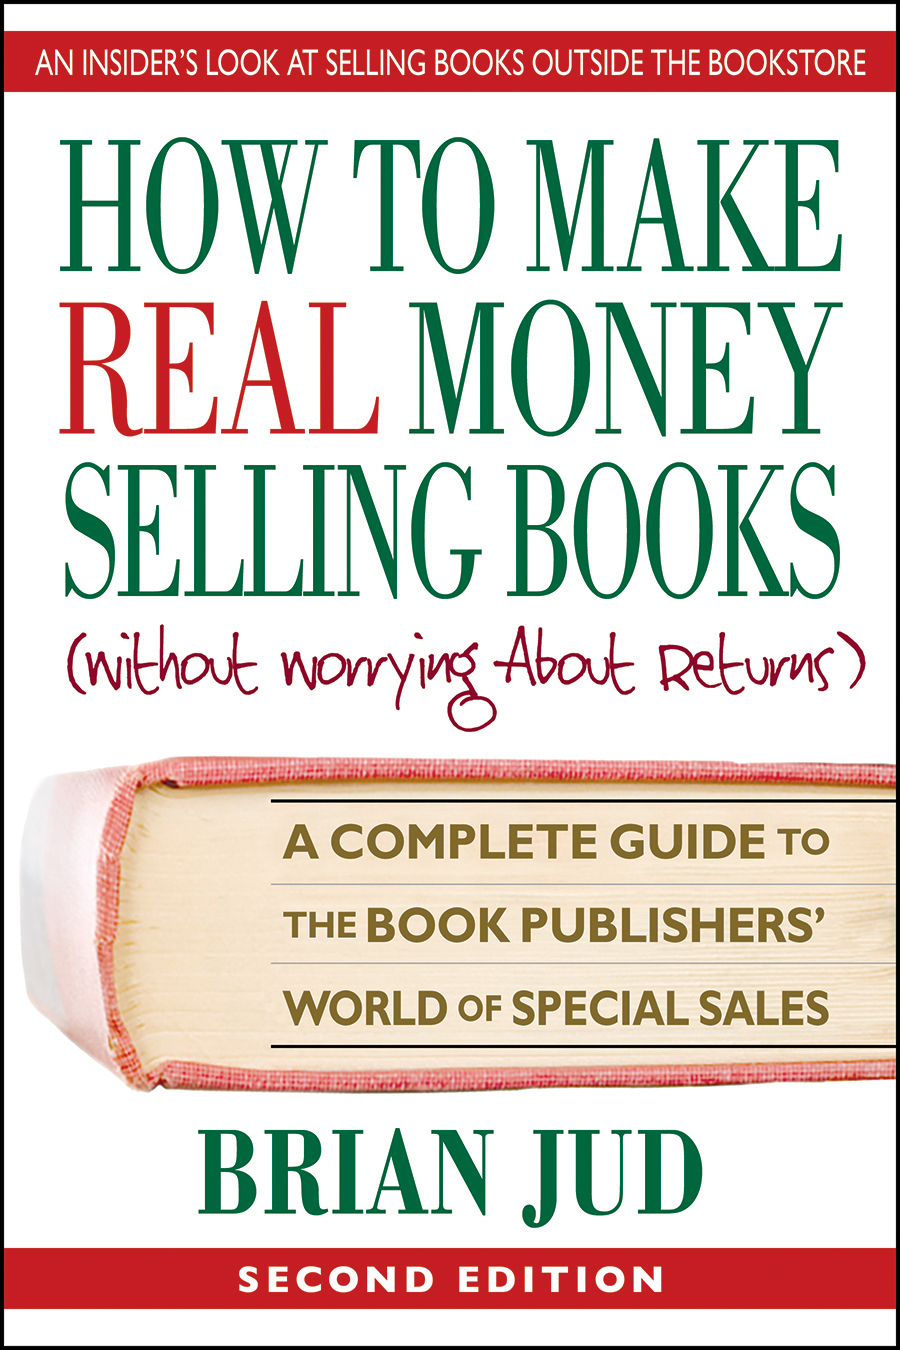 How to Make Real Money Selling Books